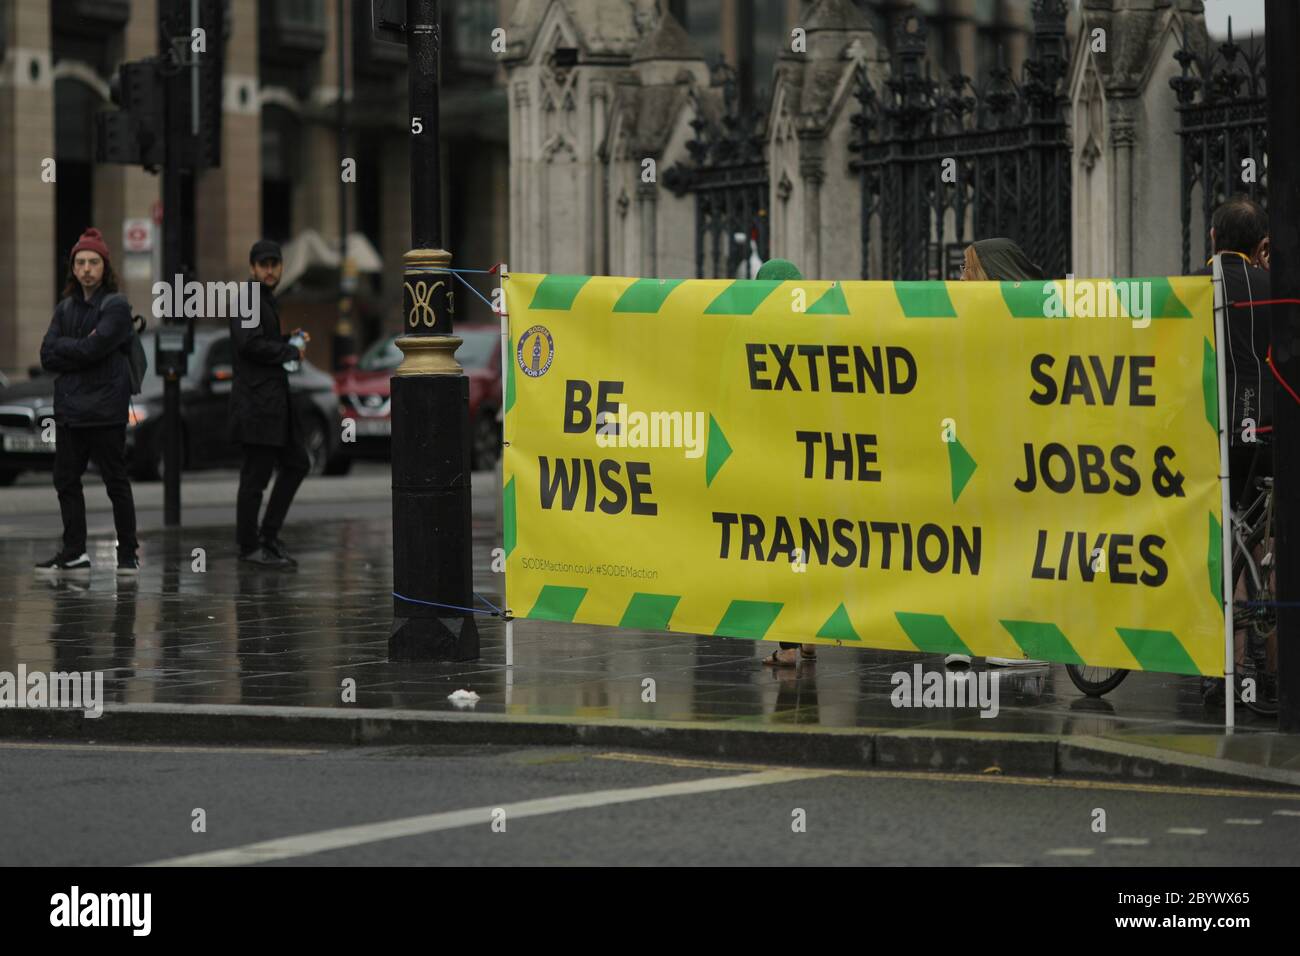 London, Britain. 10th June, 2020. People walk past a banner demanding extension of Brexit transition period outside the Houses of Parliament in London, Britain, on June 10, 2020. Britain will not extend its transitional links to the European Union (EU) beyond Dec. 31, a government minister said Tuesday following the stalled talks between London and Brussels last week. Credit: Tim Ireland/Xinhua/Alamy Live News Stock Photo